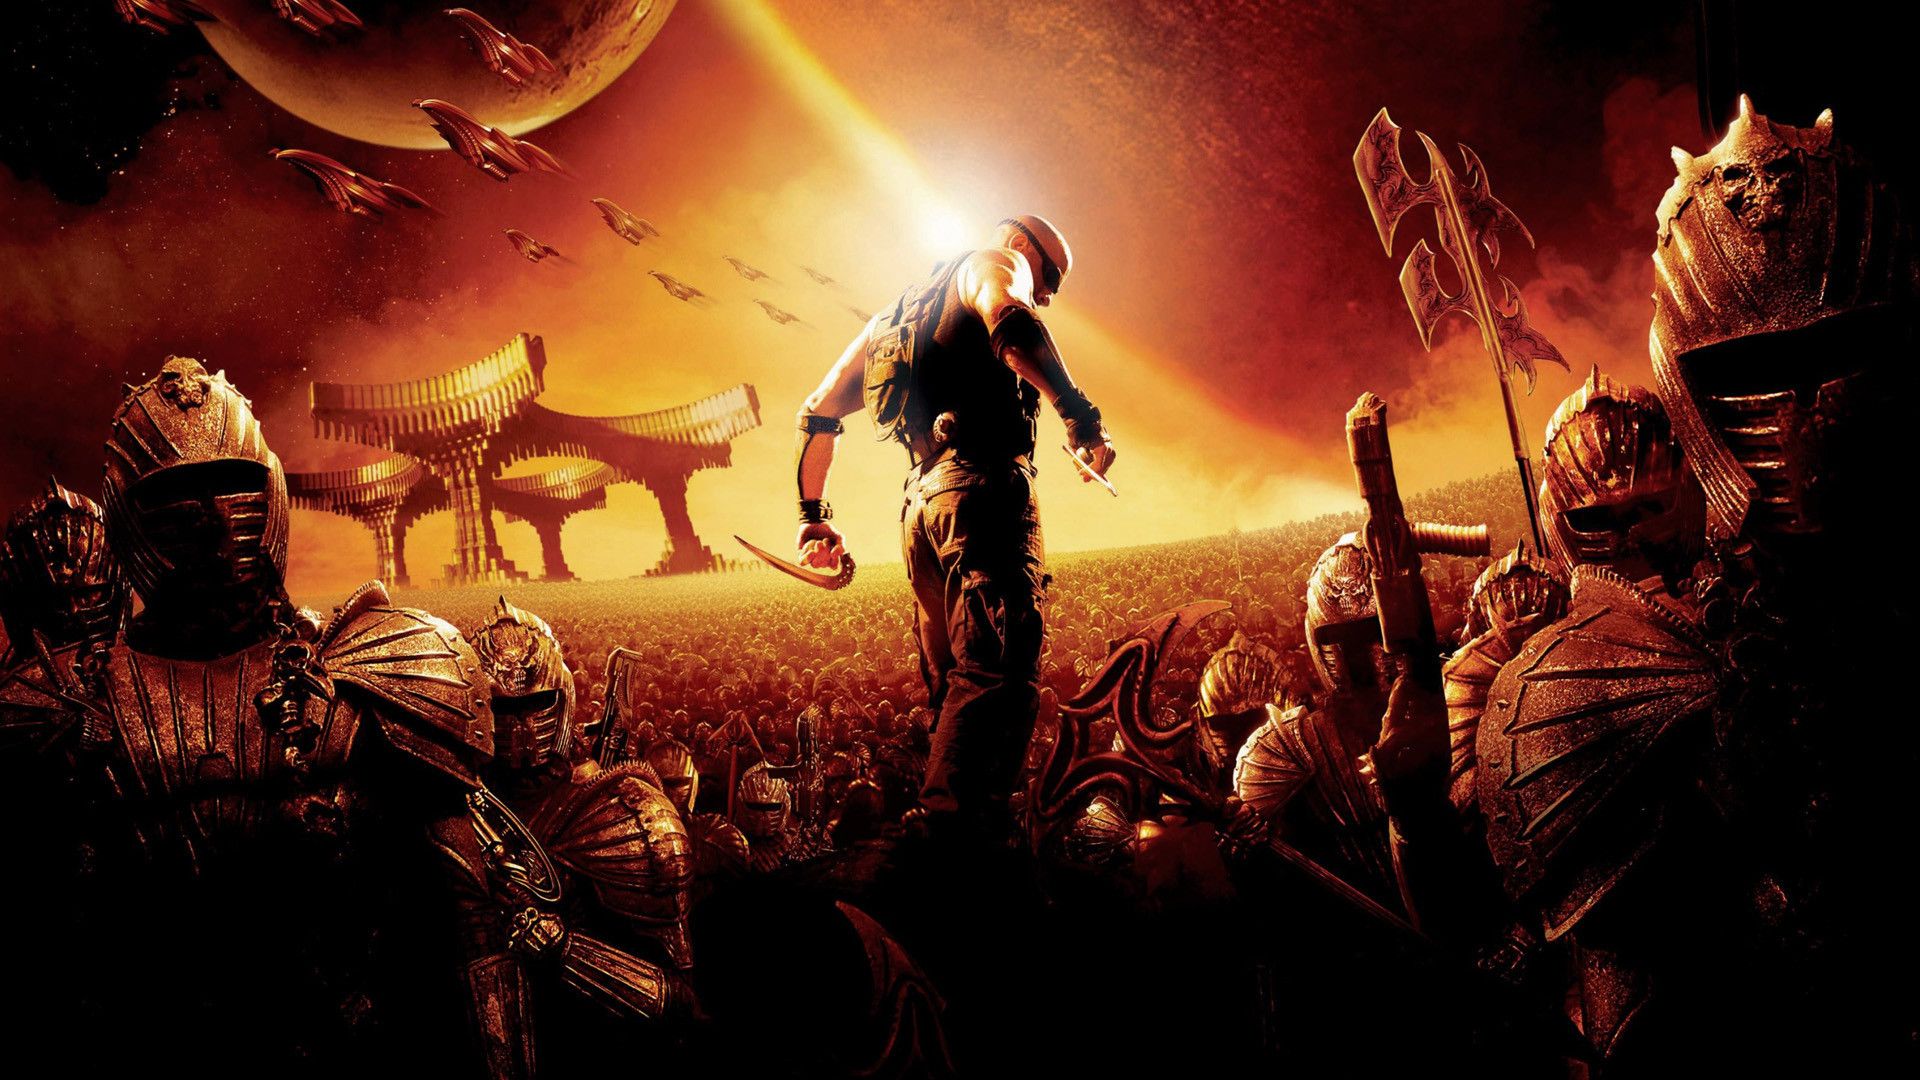 The Chronicles of Riddick background